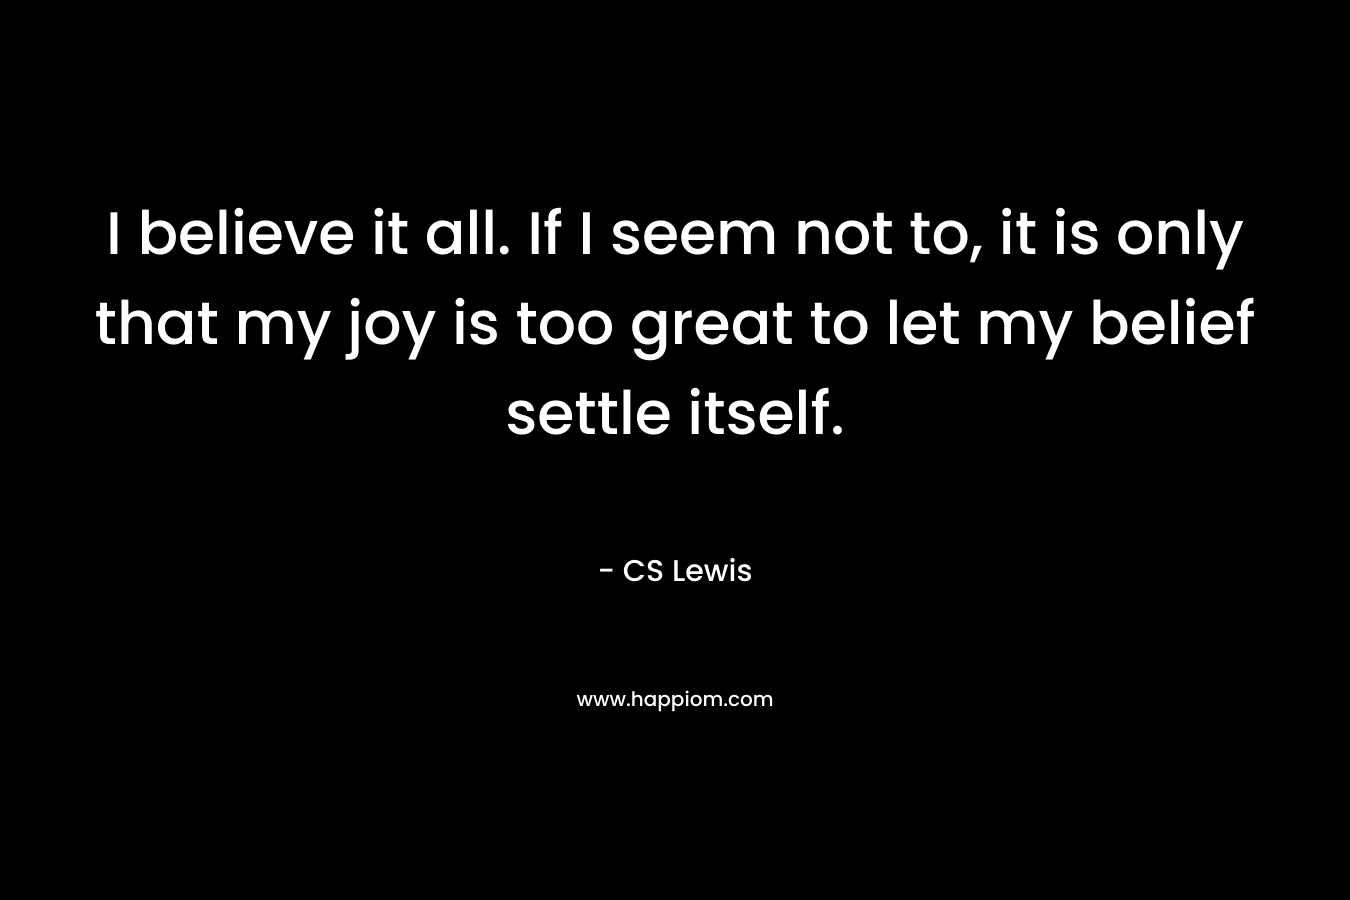 I believe it all. If I seem not to, it is only that my joy is too great to let my belief settle itself.